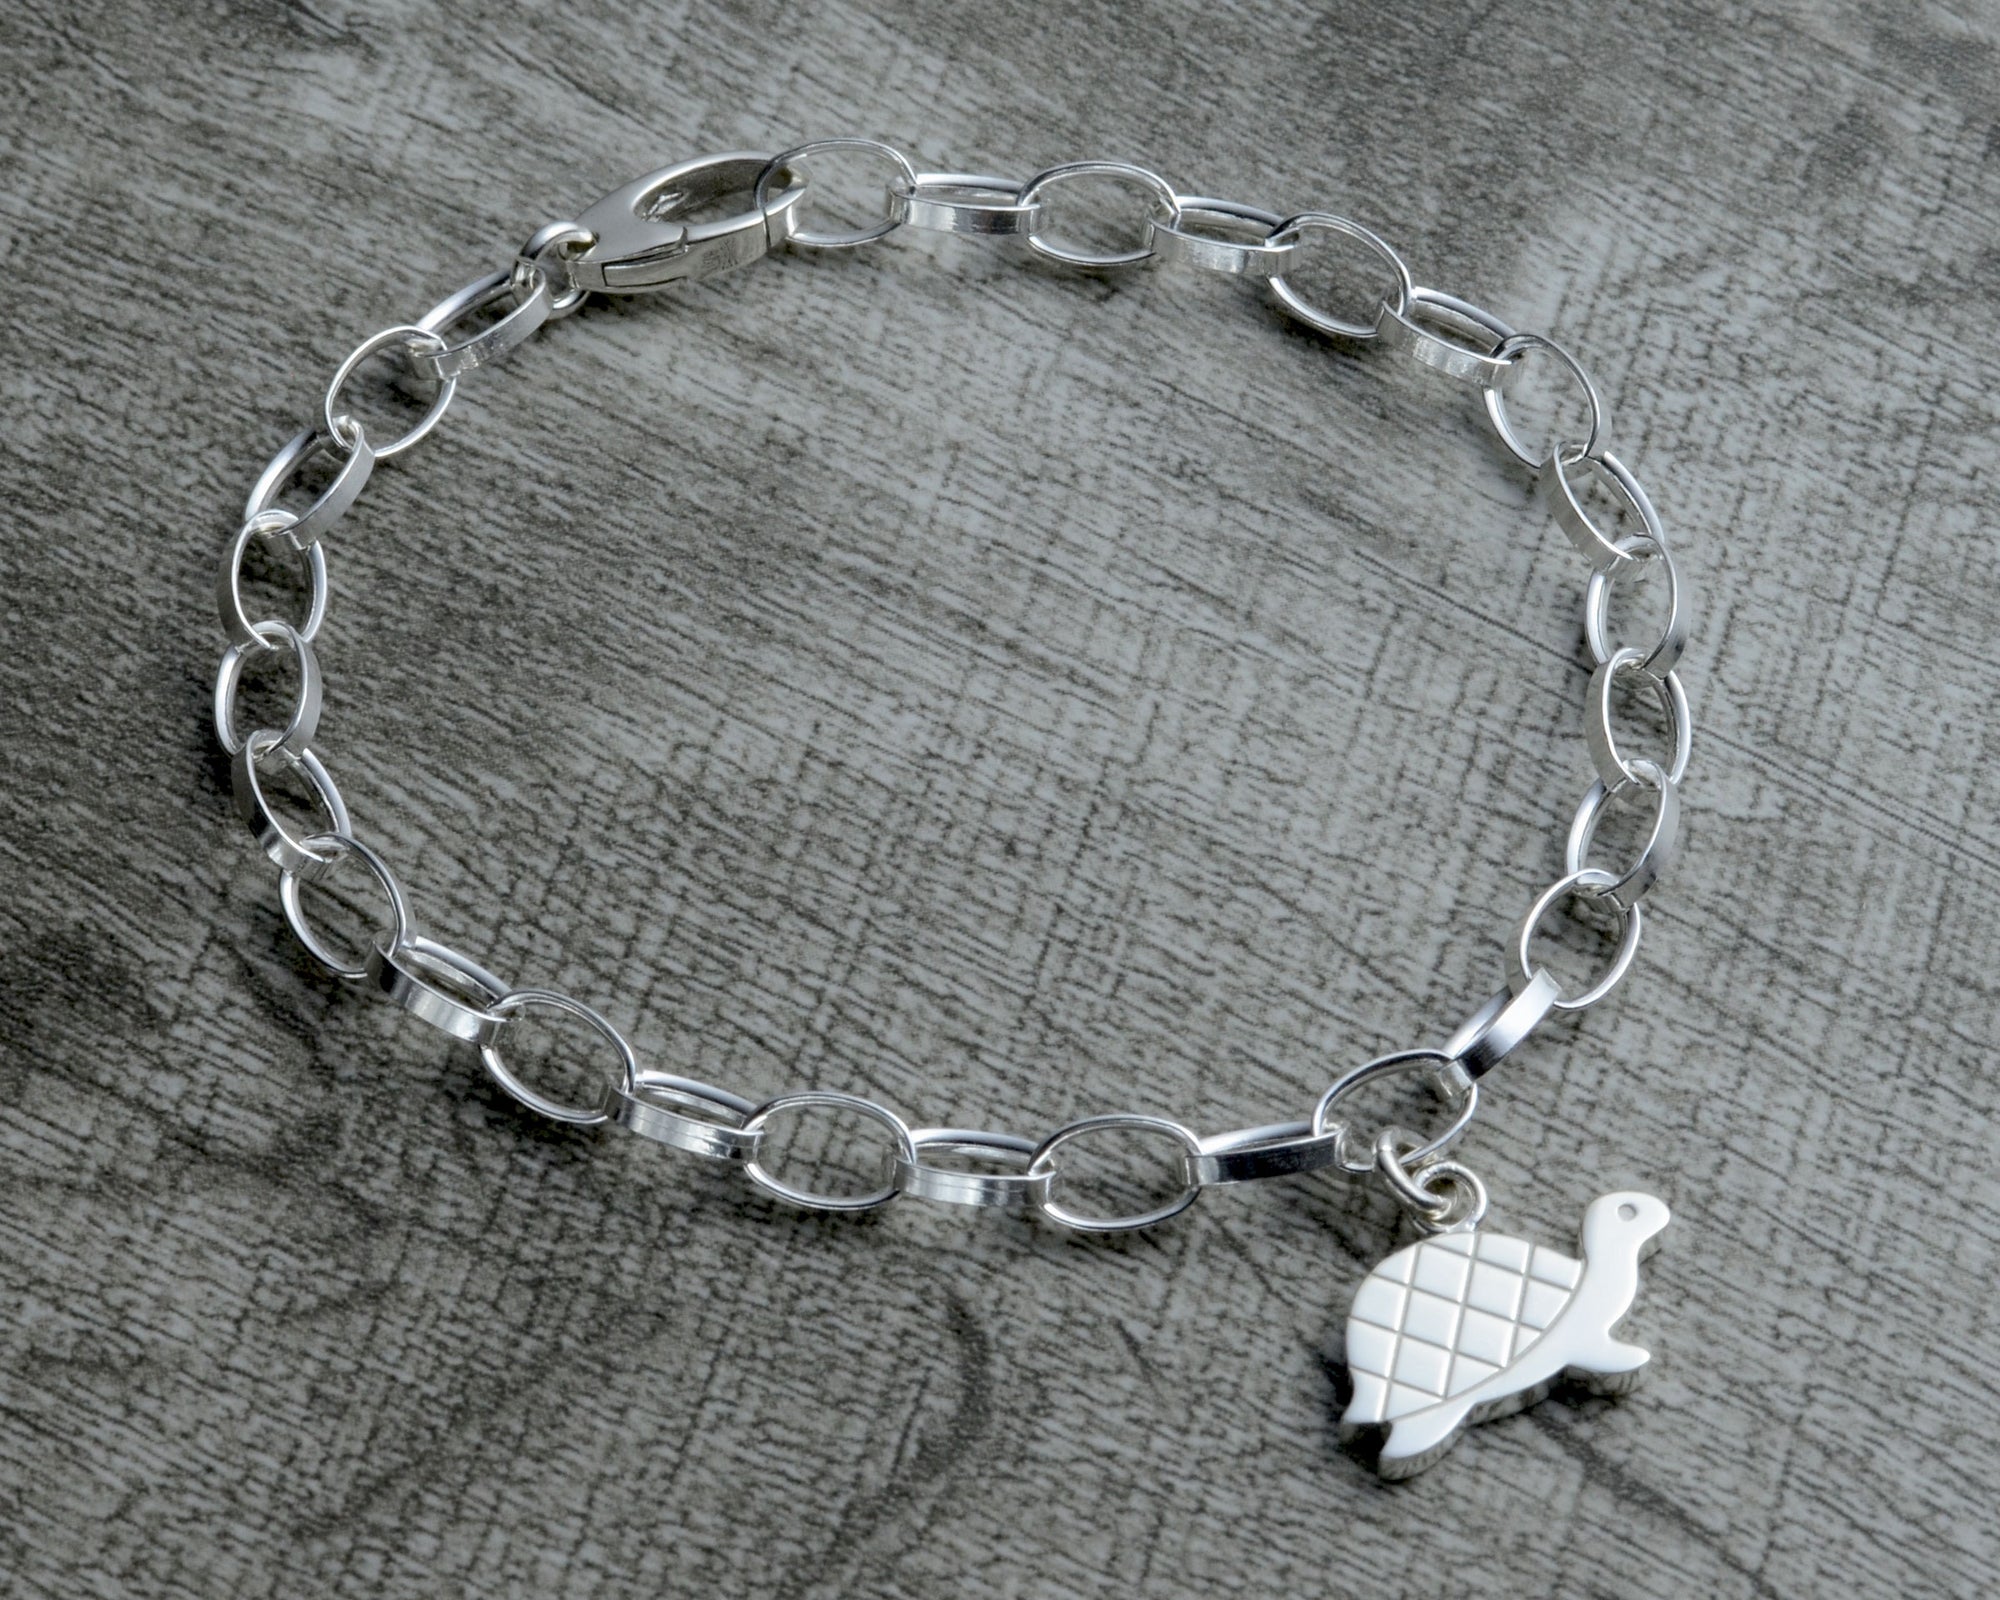 Turtle charm bracelet in sterling silver with clasp